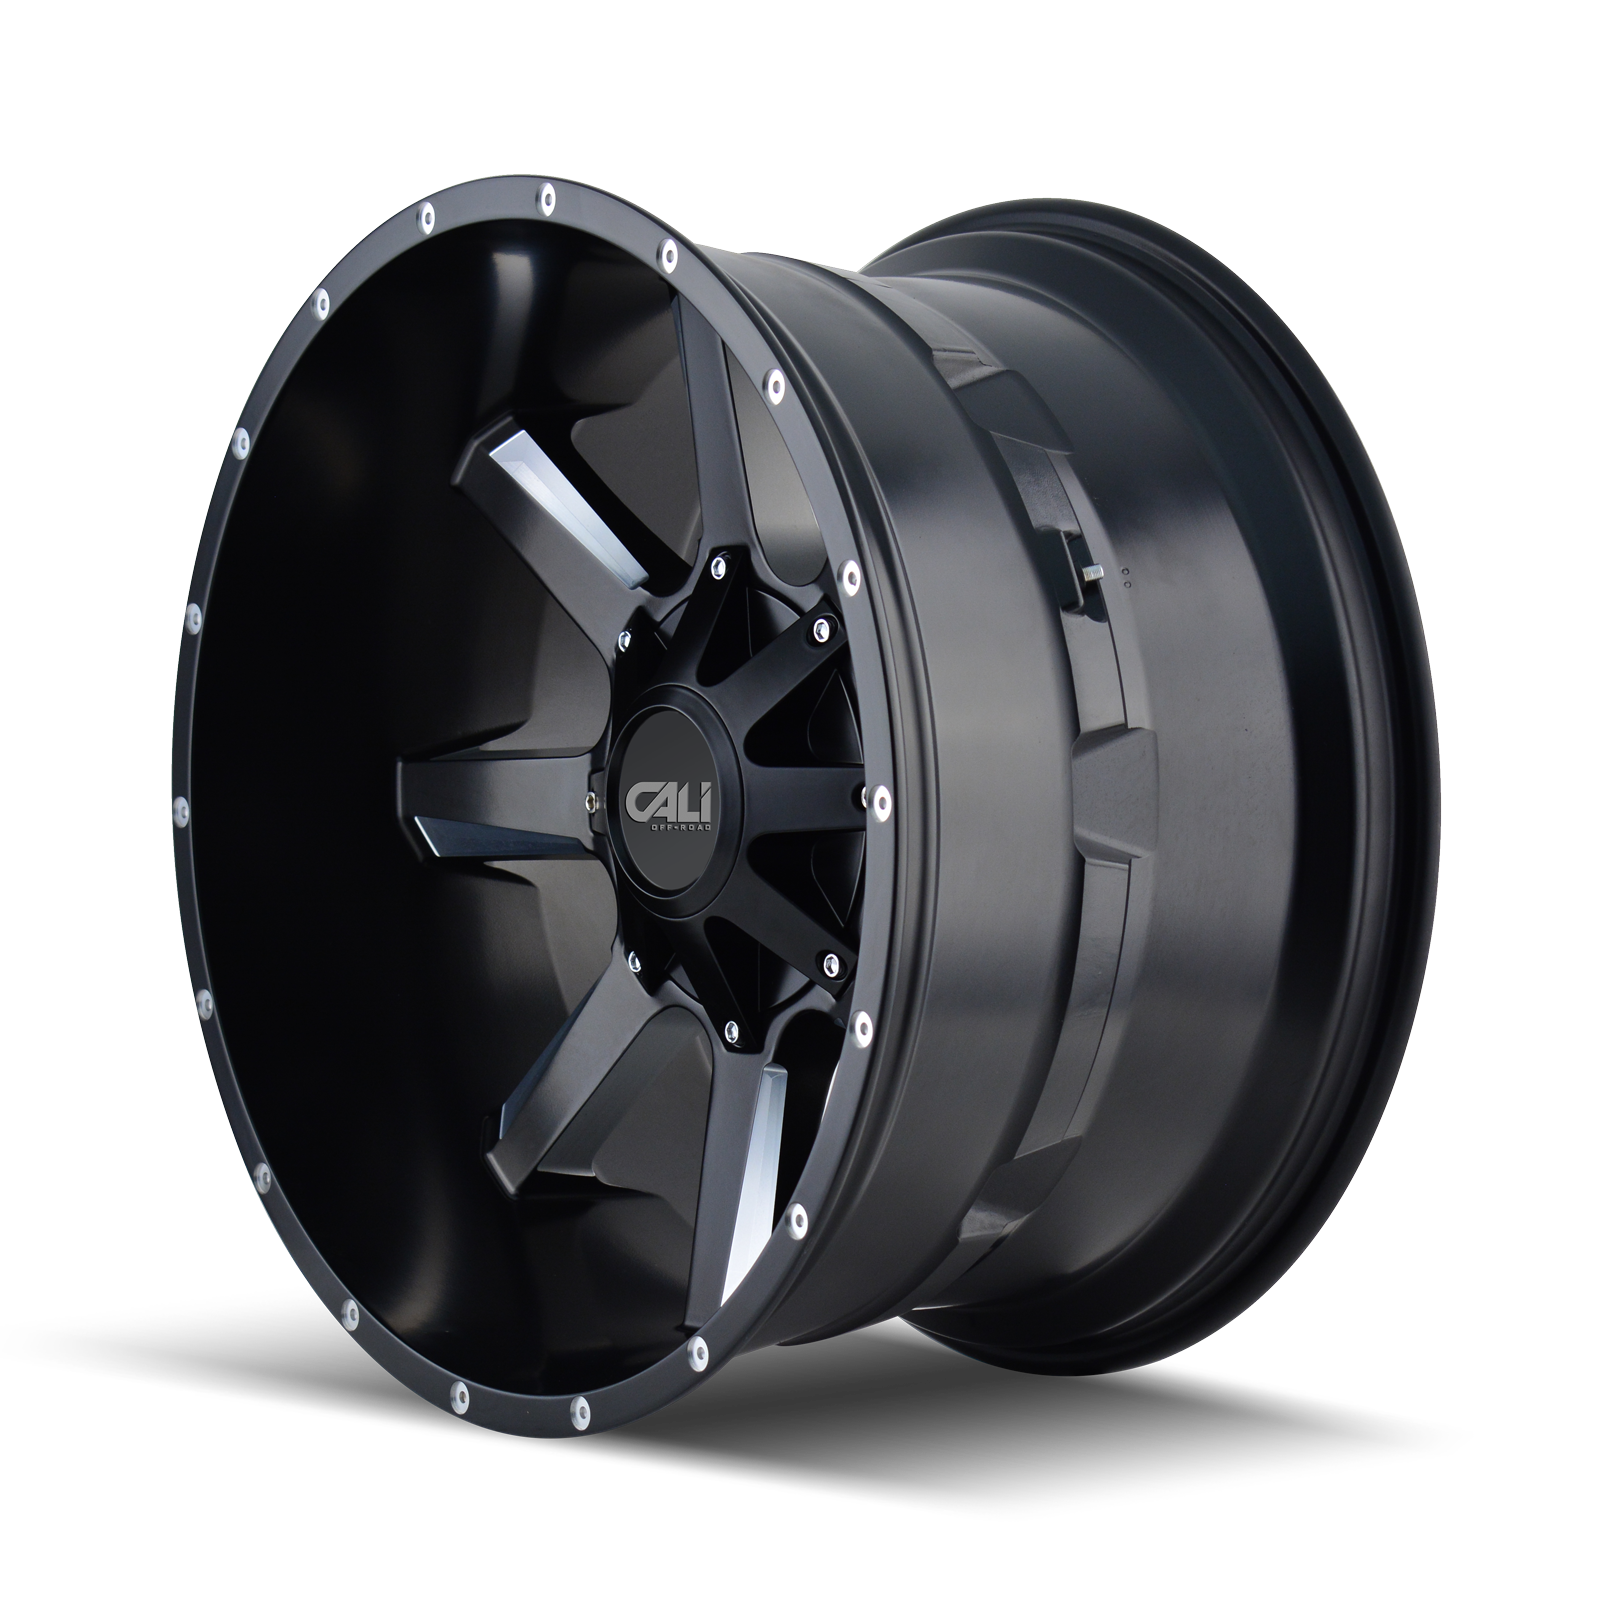 Cali Off-road BUSTED Satin black milled 20x9 0 8x165.1|8x170mm 130.8mm